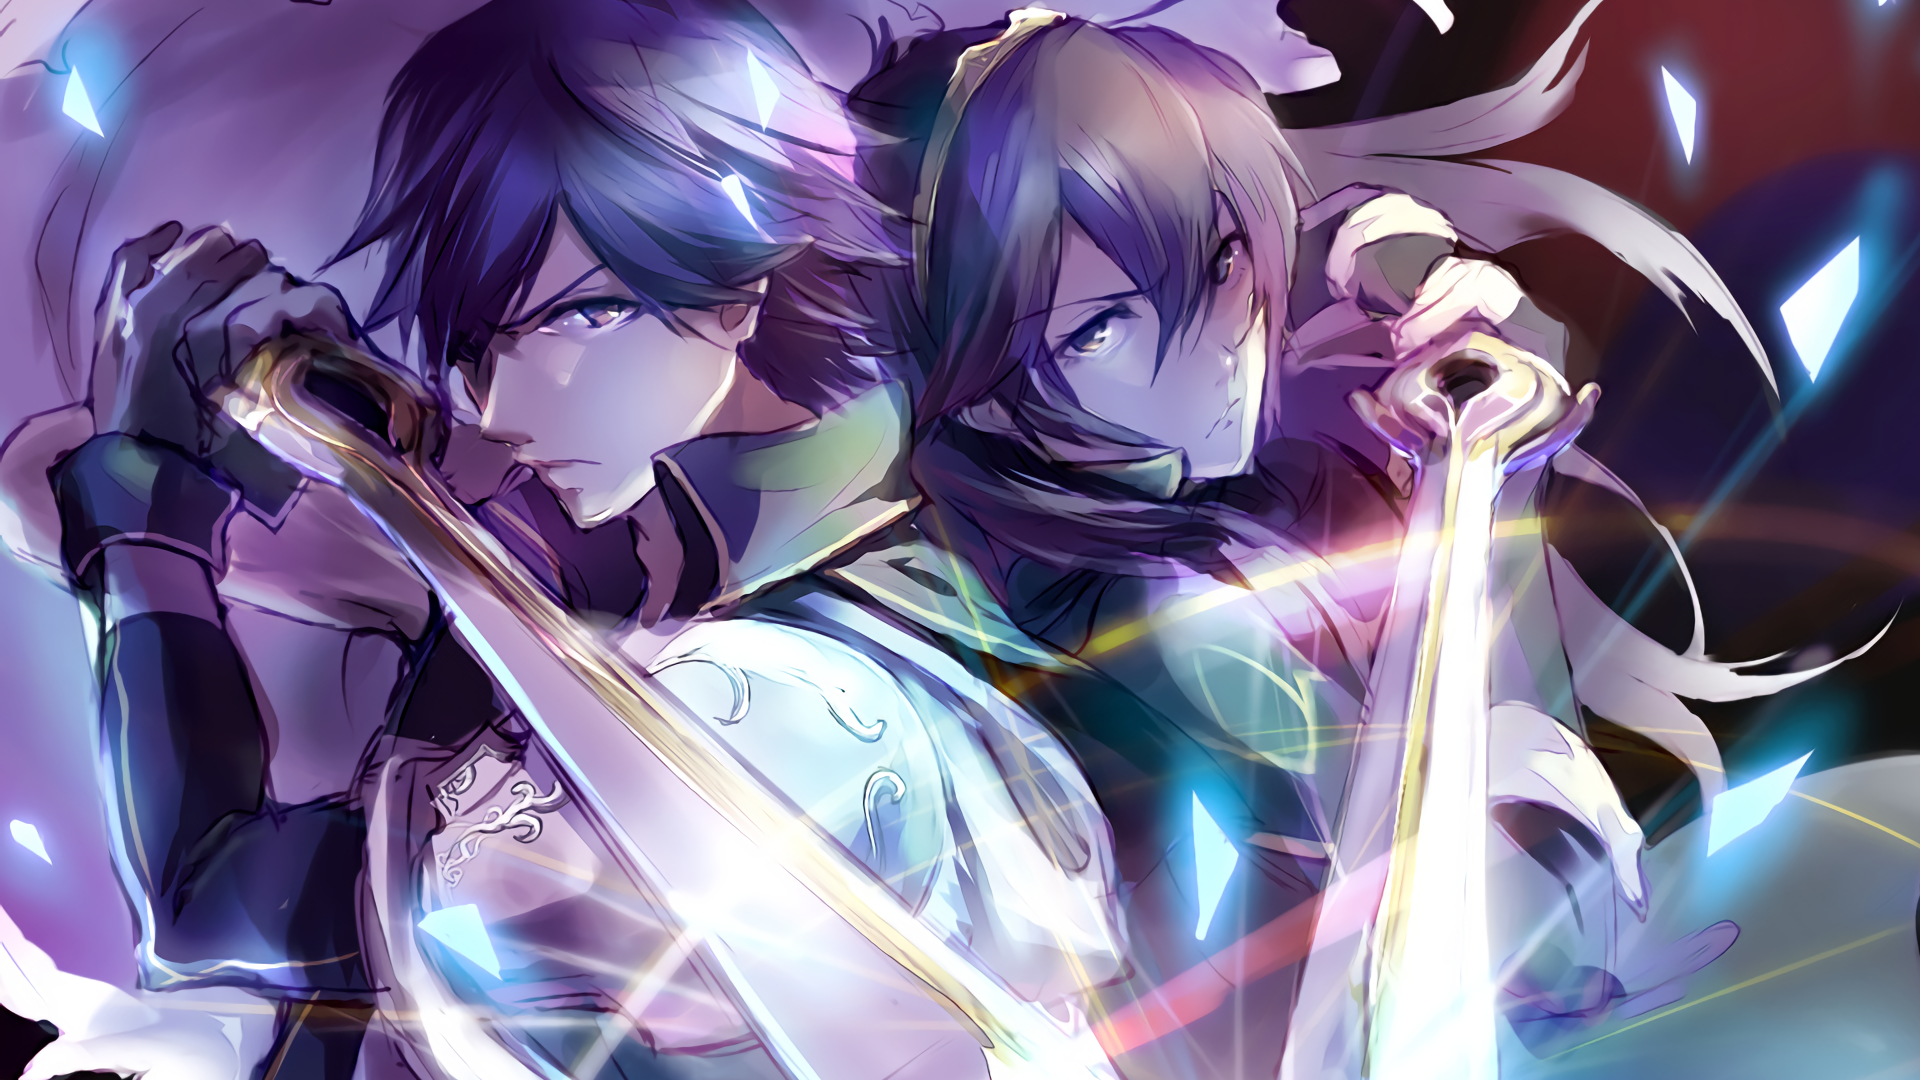 Parallel Falchions by Sayaomu